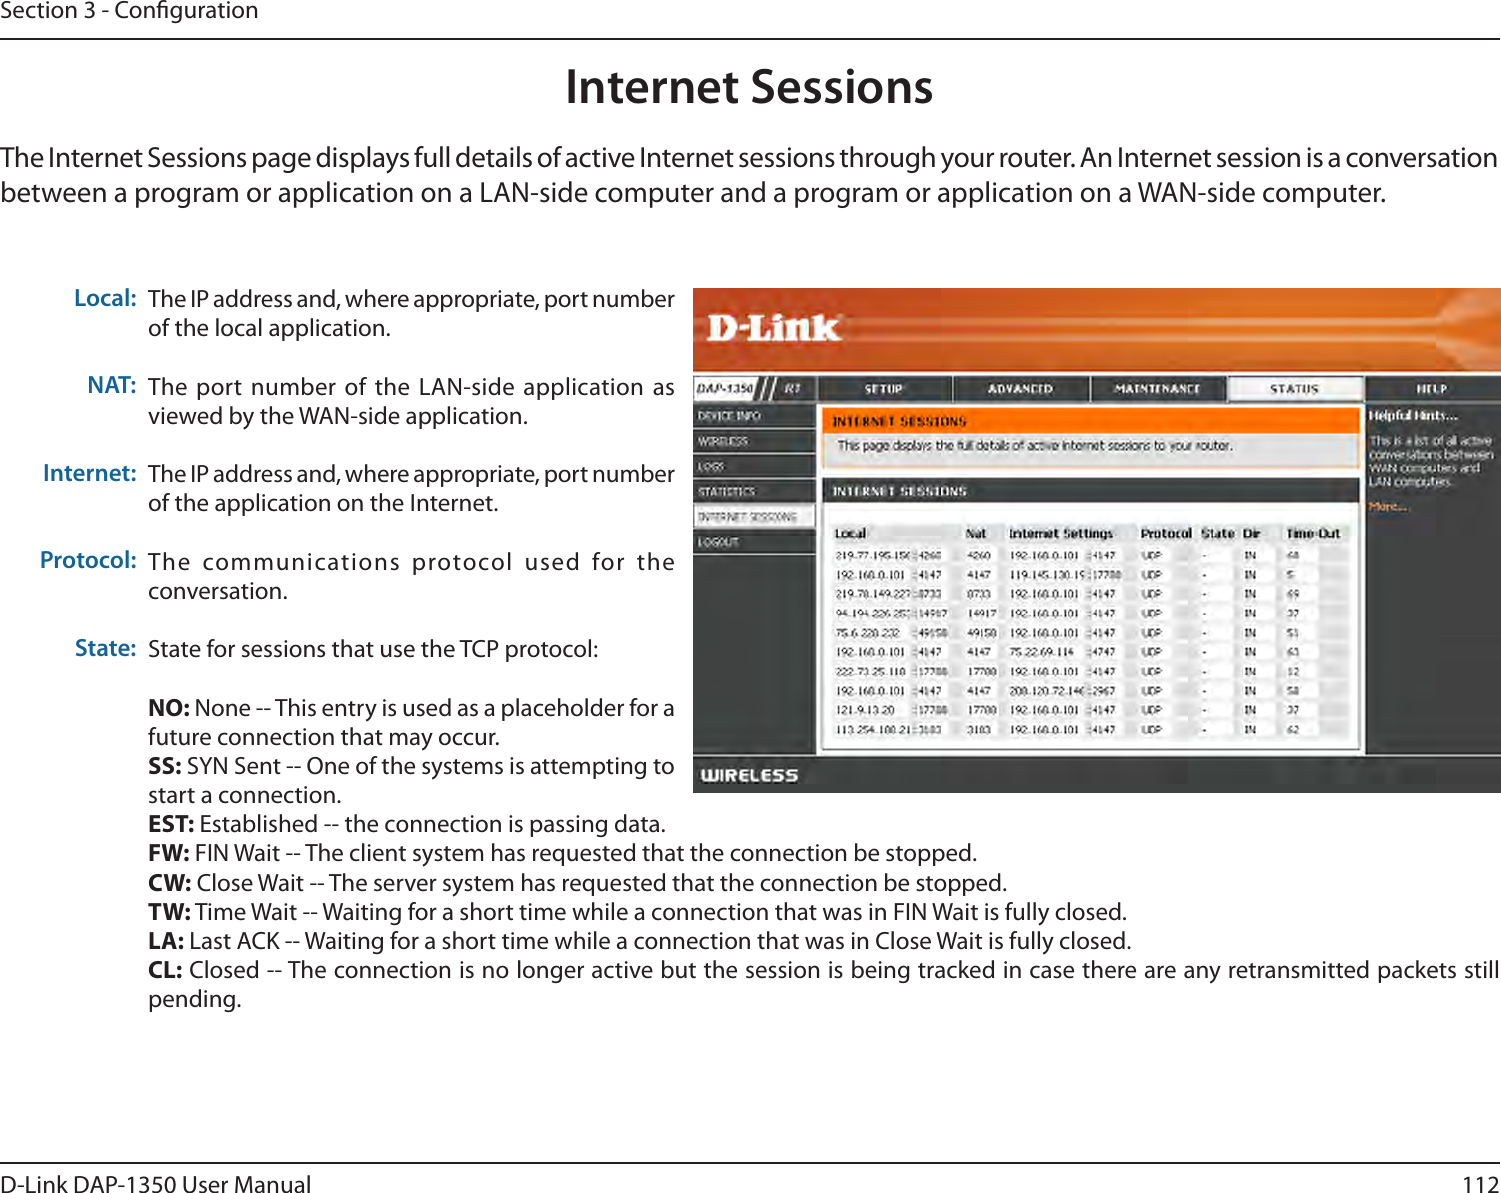 112D-Link DAP-1350 User ManualSection 3 - CongurationInternet SessionsThe Internet Sessions page displays full details of active Internet sessions through your router. An Internet session is a conversation between a program or application on a LAN-side computer and a program or application on a WAN-side computer. Local:NAT:Internet:Protocol:State:The IP address and, where appropriate, port number of the local application. The port number  of the  LAN-side application  as viewed by the WAN-side application. The IP address and, where appropriate, port number of the application on the Internet. The  communications  protocol  used  for  the conversation. State for sessions that use the TCP protocol:NO: None -- This entry is used as a placeholder for a future connection that may occur.SS: SYN Sent -- One of the systems is attempting to start a connection.EST: Established -- the connection is passing data.FW: FIN Wait -- The client system has requested that the connection be stopped.CW: Close Wait -- The server system has requested that the connection be stopped.TW: Time Wait -- Waiting for a short time while a connection that was in FIN Wait is fully closed.LA: Last ACK -- Waiting for a short time while a connection that was in Close Wait is fully closed.CL: Closed -- The connection is no longer active but the session is being tracked in case there are any retransmitted packets still pending.